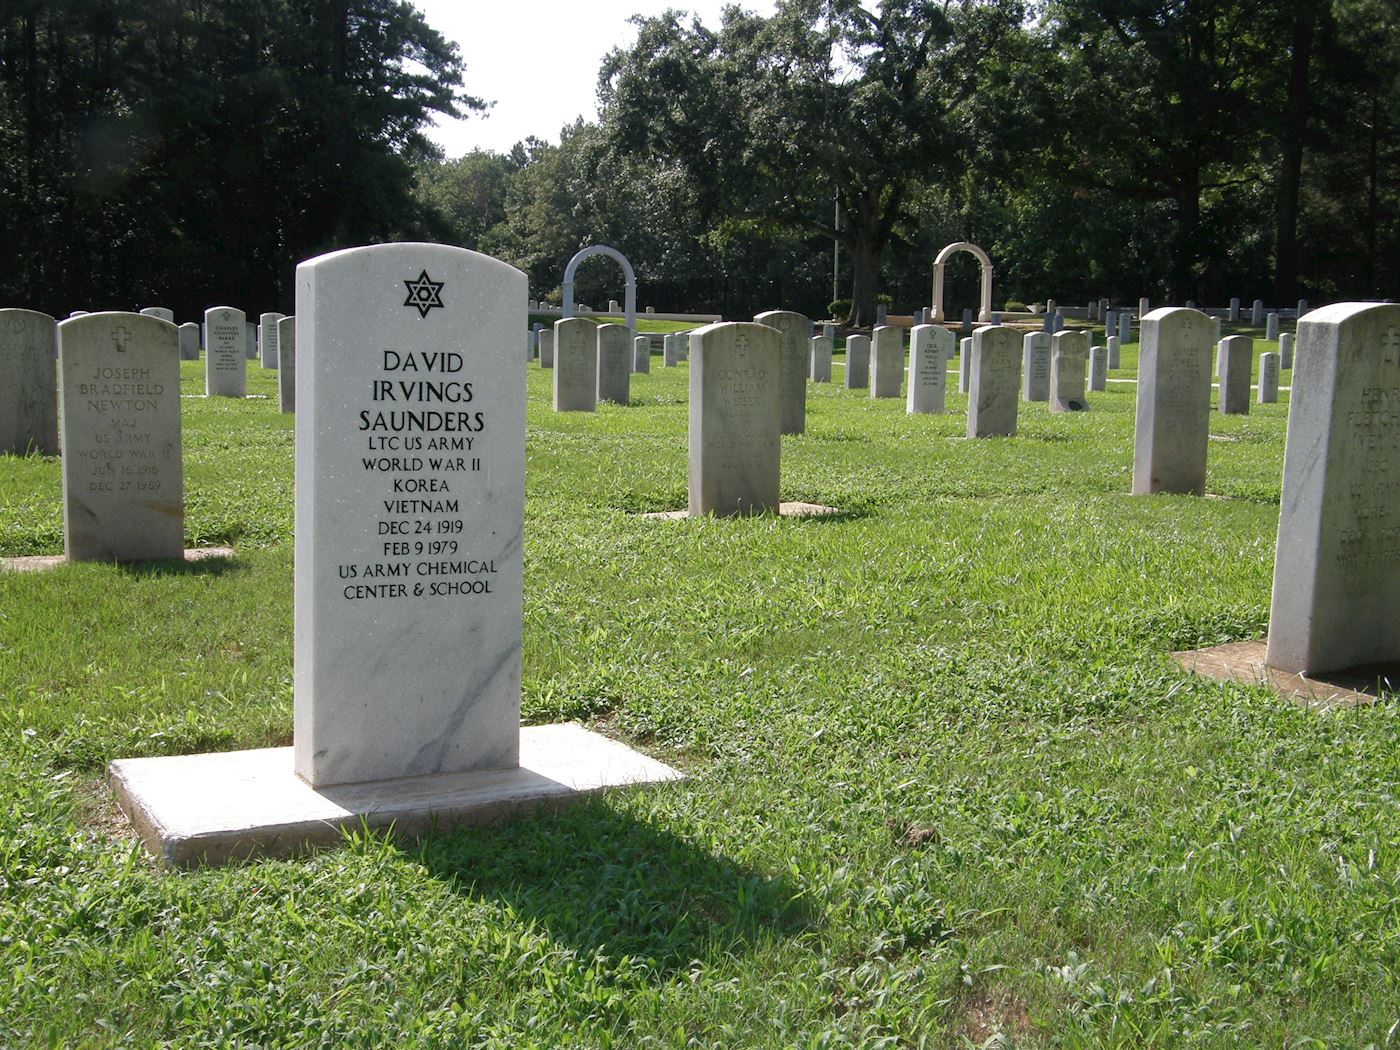 There are 355 headstones in the small Military Cemetery on Fort McClellan, Ala.